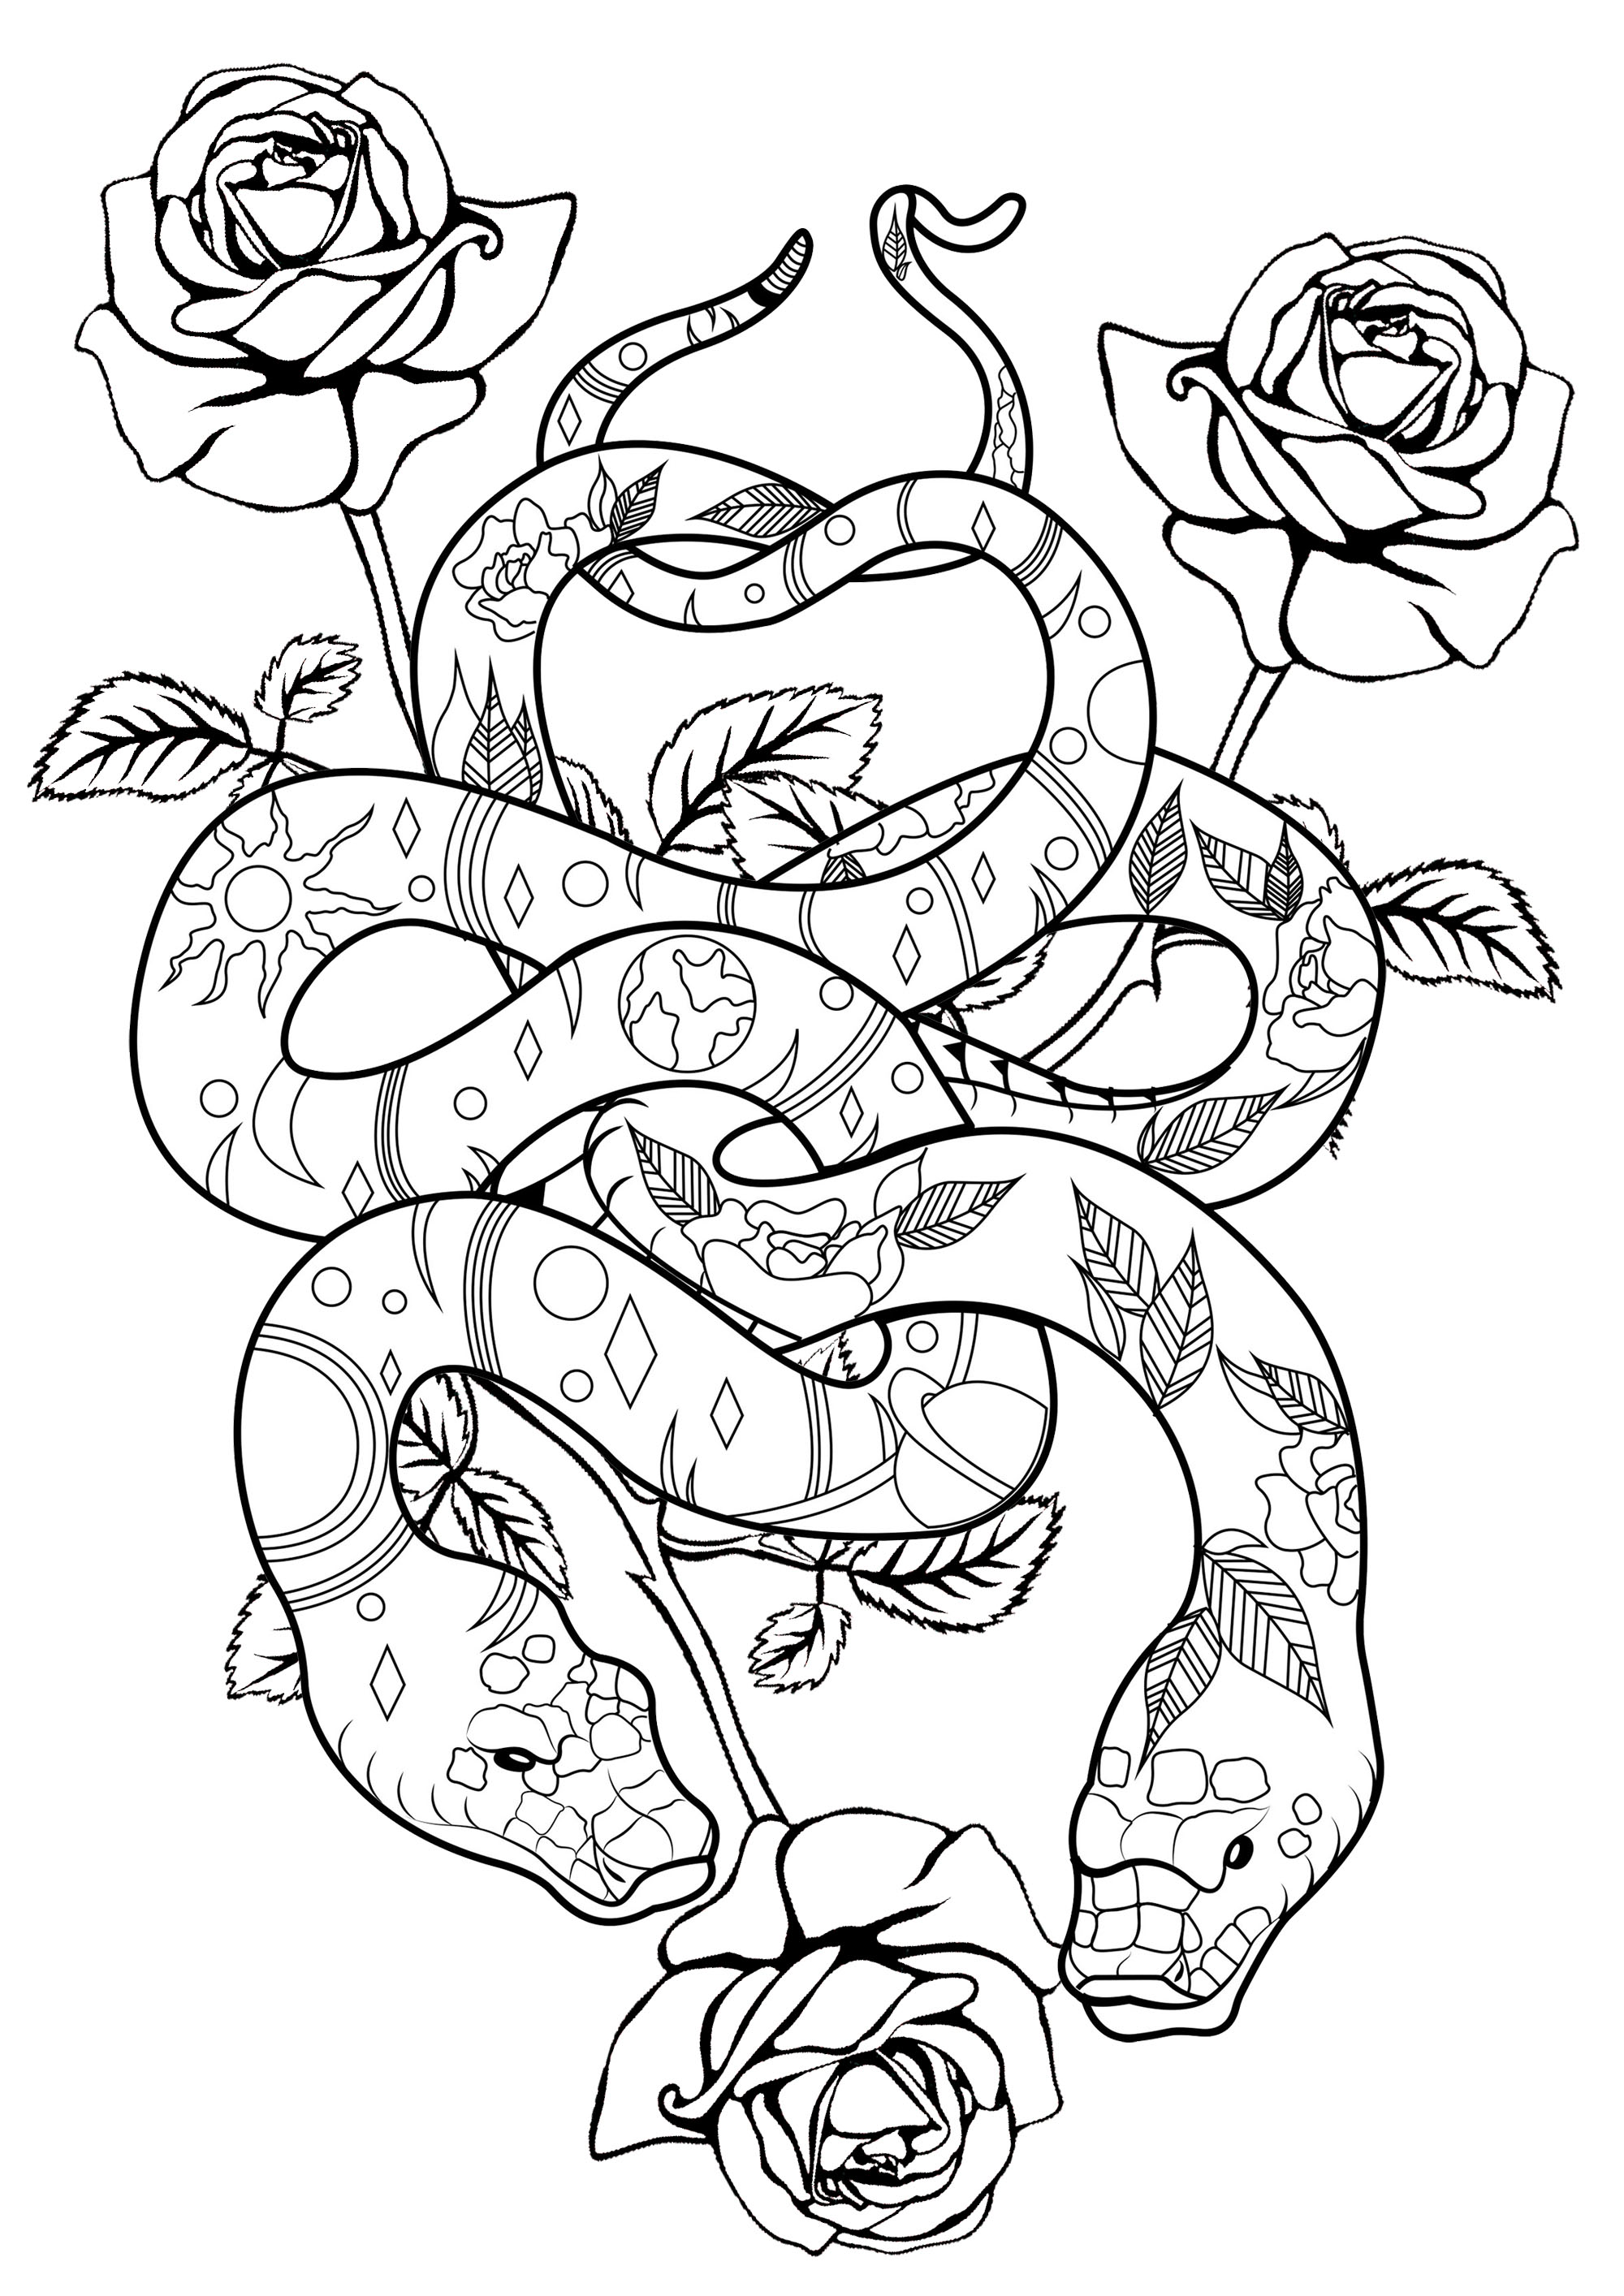 Snakes and roses mixed, for a mix between sweetness and danger .., Artist : Arwen